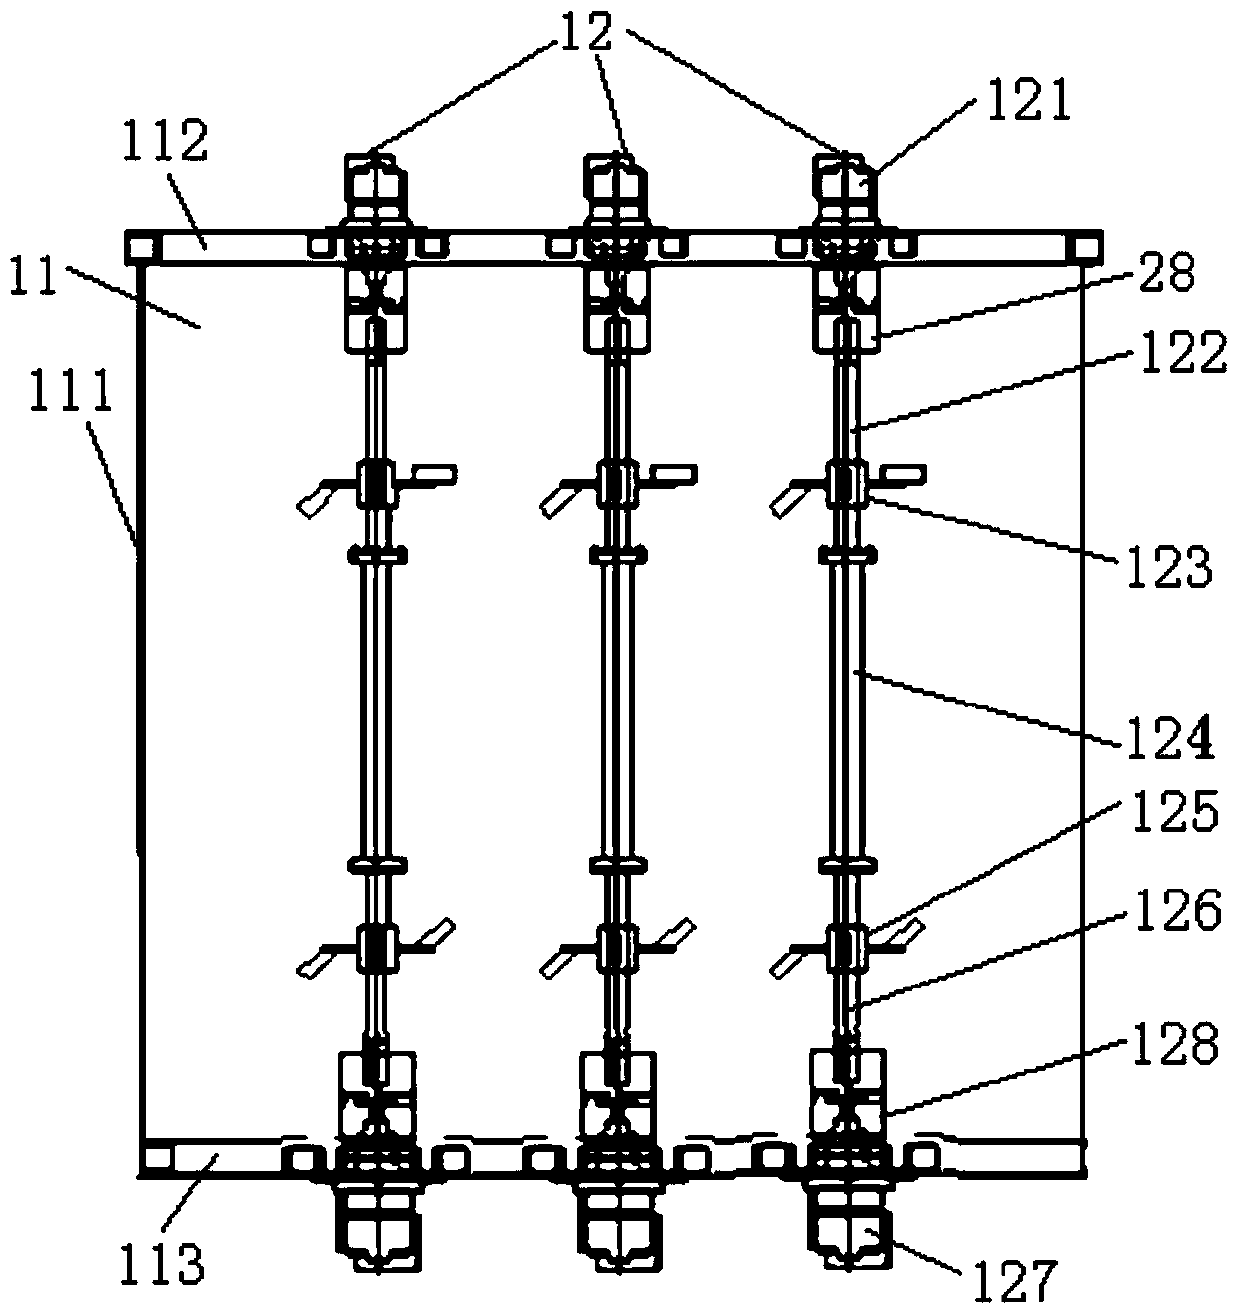 Seaborne continuous blending device for fracturing fluid